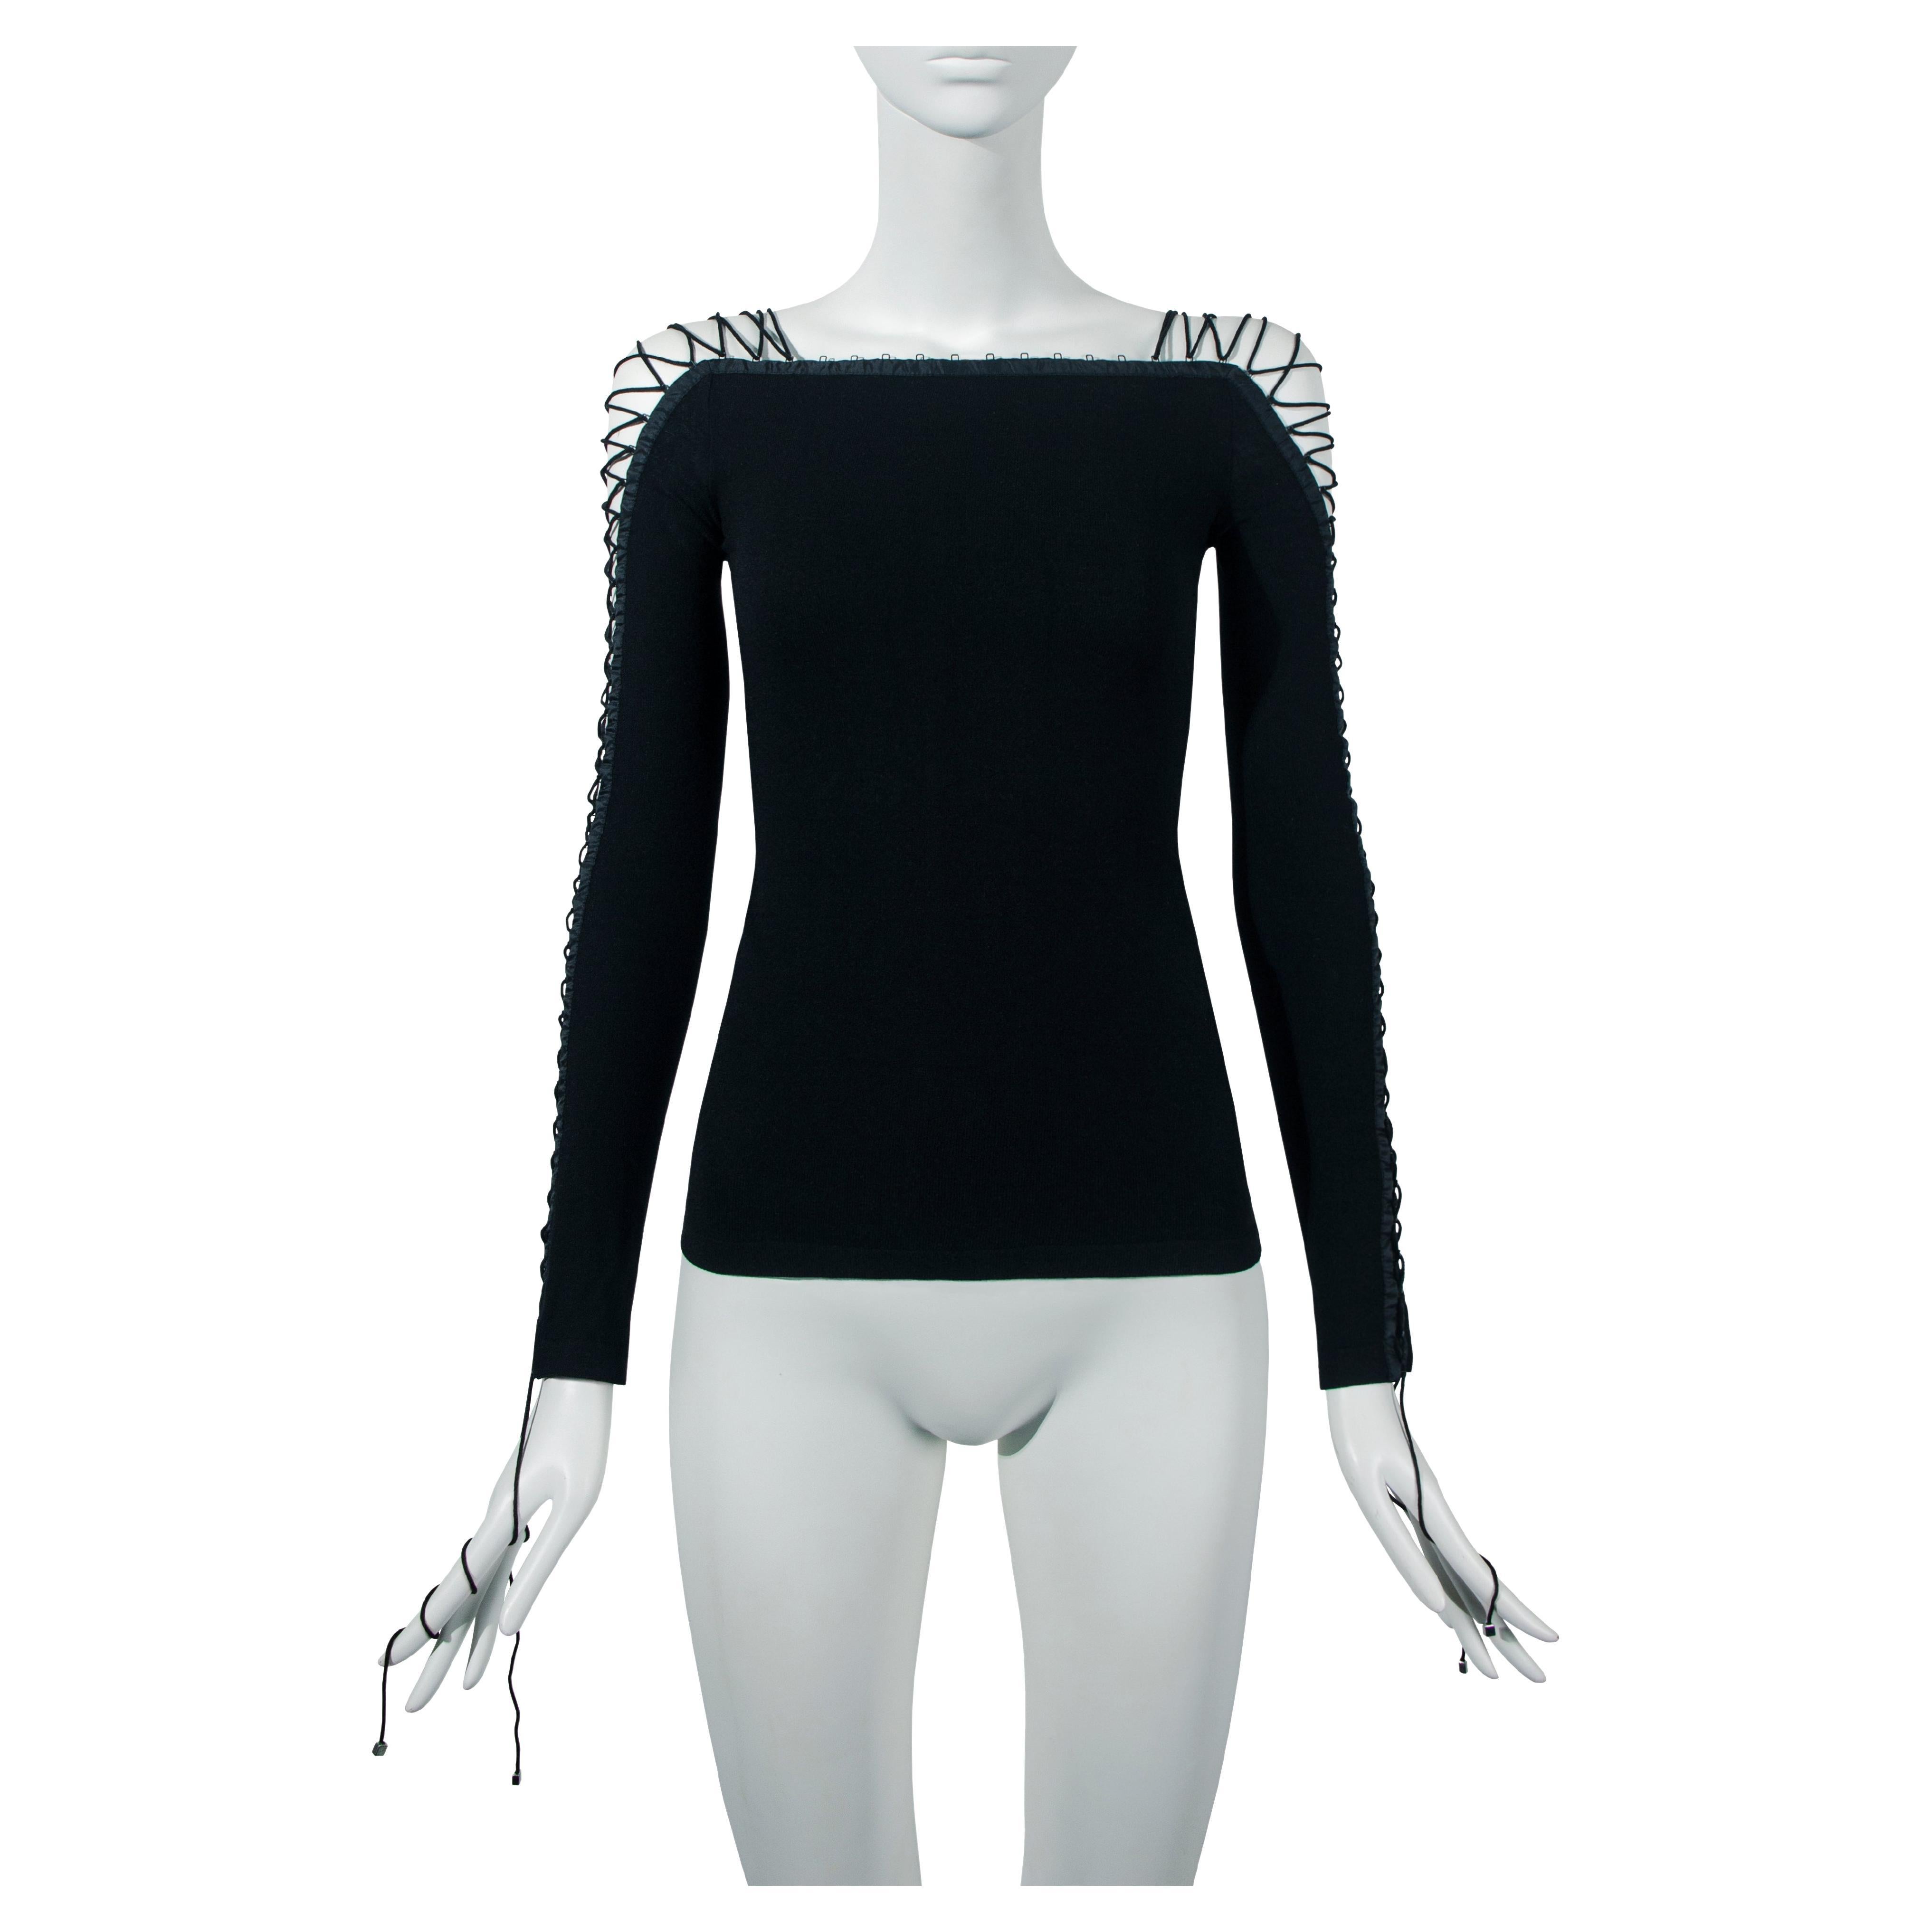 A Dolce & Gabbana lace-up long sleeve top, Fall-Winter 2003. This garment subverts edgy and gothic details to create a stylistic and glamorous garment. Crafted from the finest matte wool, its key feature is the black cord lacing that adorns both the